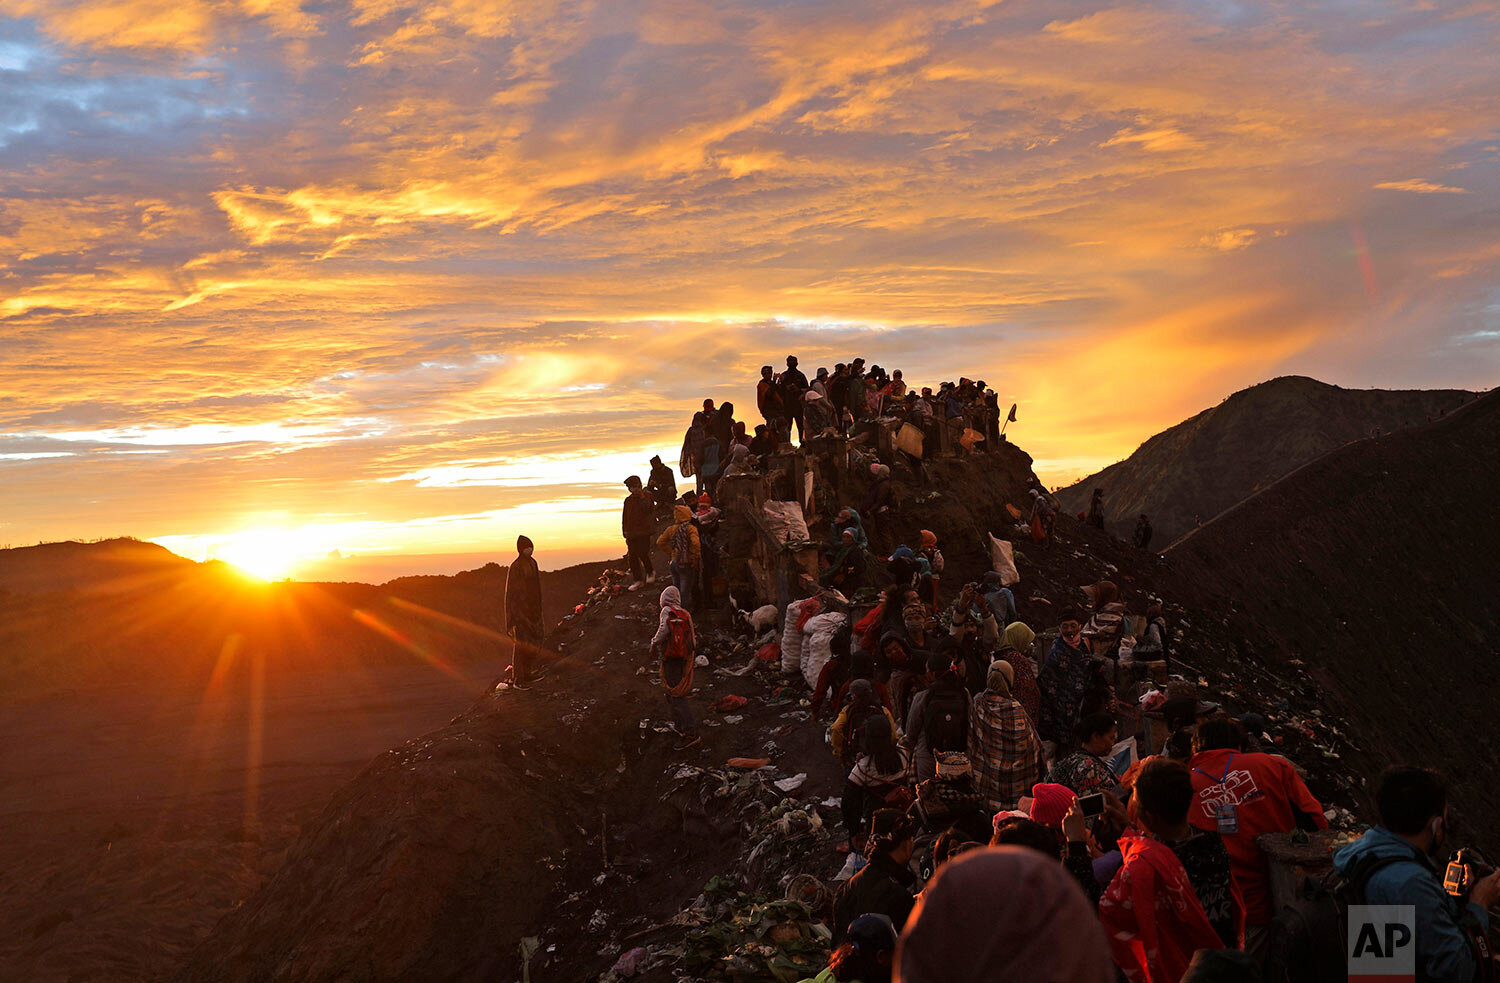  Hindu devotees and visitors make their way to the top of of Mount Bromo at dawn during Yadnya Kasada festival in Probolinggo, East Java, Indonesia, Tuesday, July 7, 2020. (AP Photo/Trisnadi) 